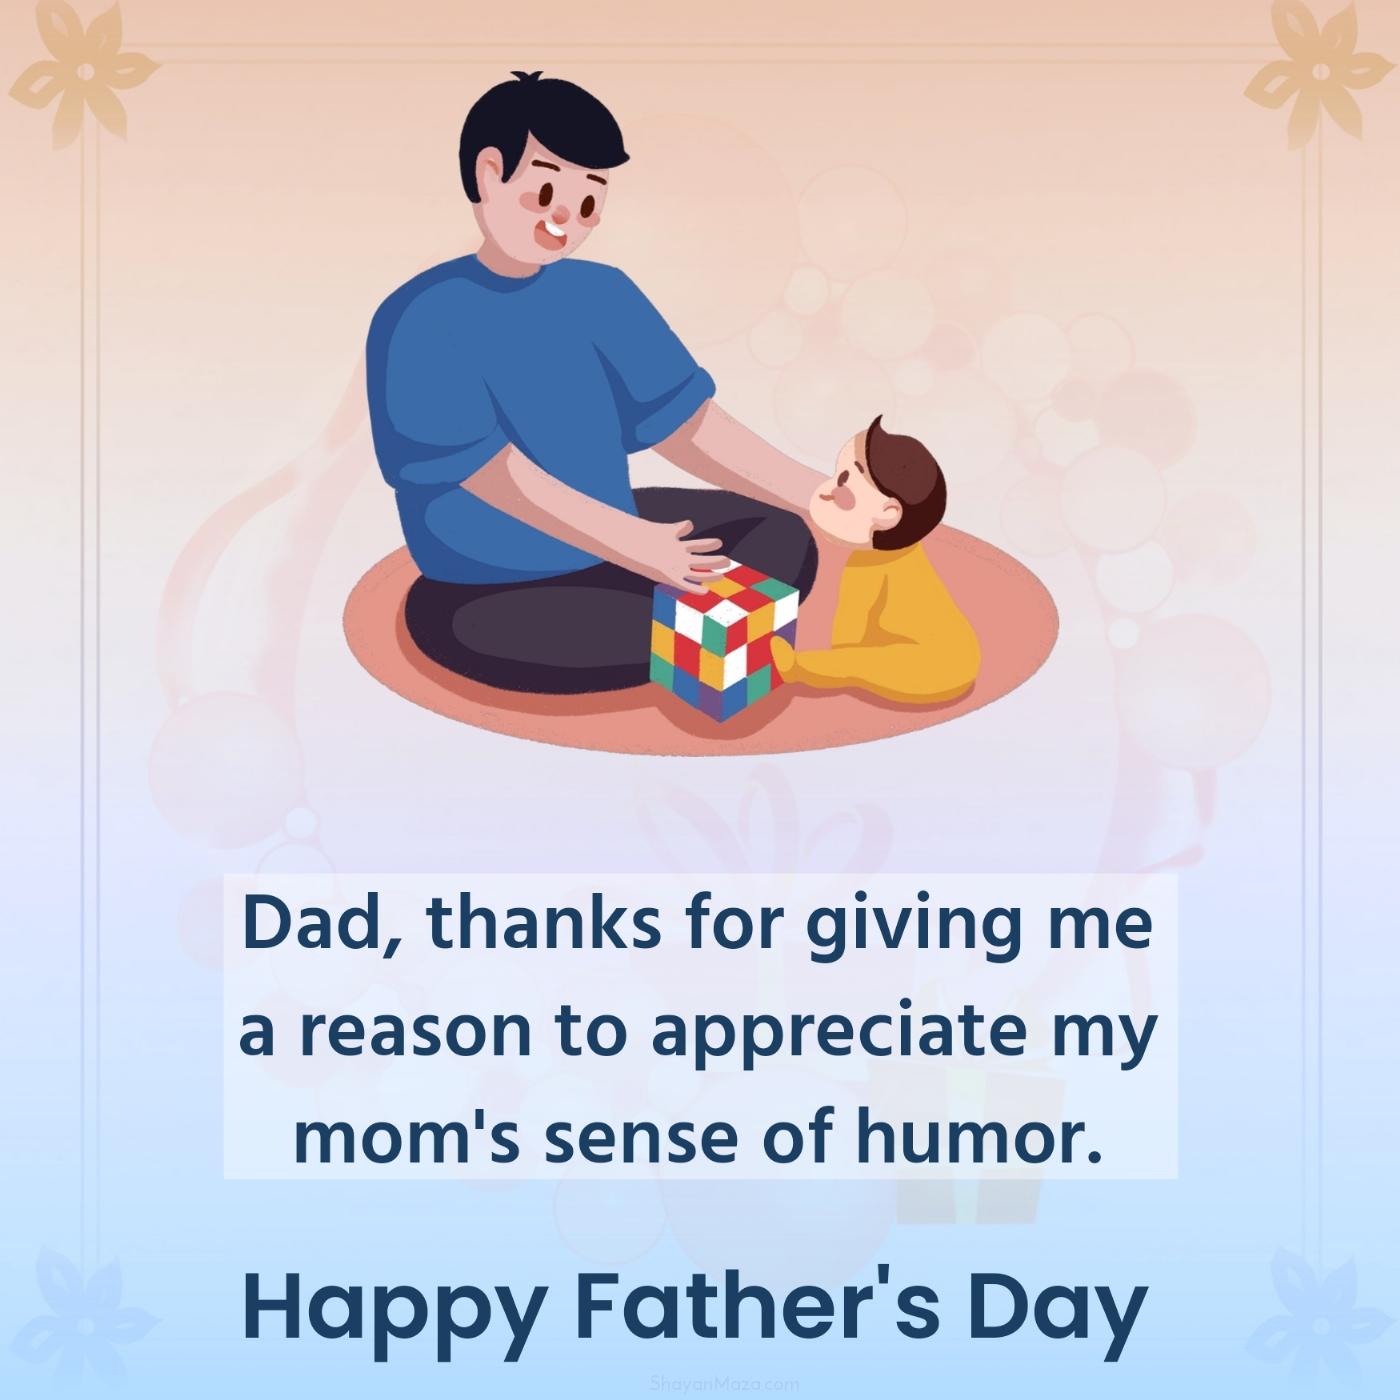 Dad thanks for giving me a reason to appreciate